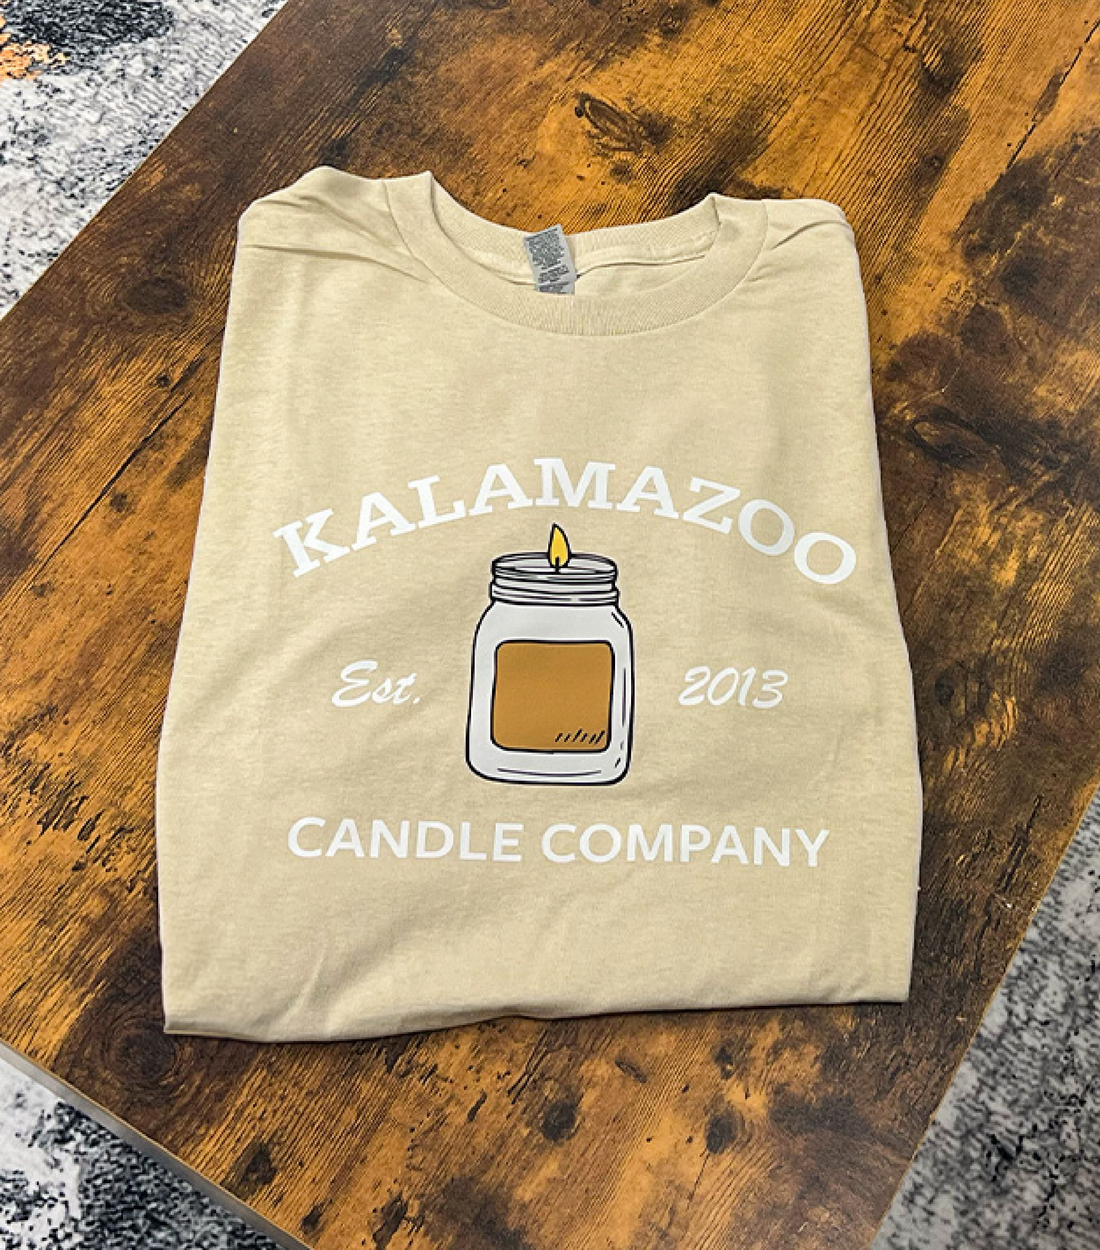 A tan Kalamazoo Candle T-Shirt with a candle on the front.